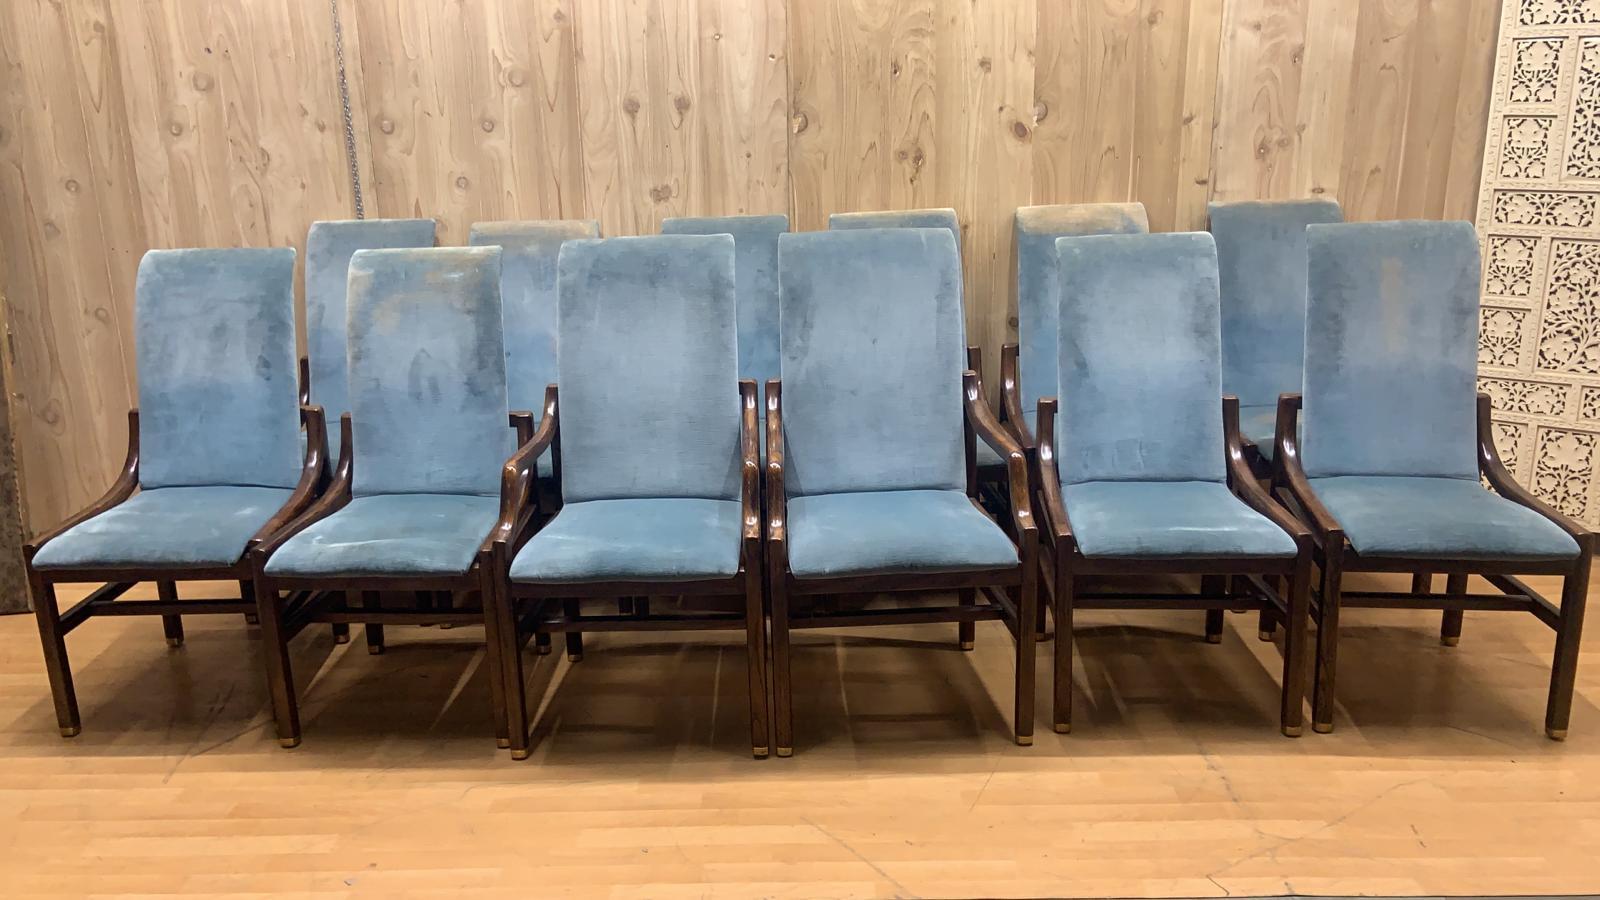 Vintage Mid Century Modern Henredon Scene One Collection Dining Chairs - Set of 12

Vintage Mid Century Modern Henredon “Scene One Collection” 12 parsons dining chairs (10 side chairs and 2 armchairs). The chairs have beautiful walnut wood frames,